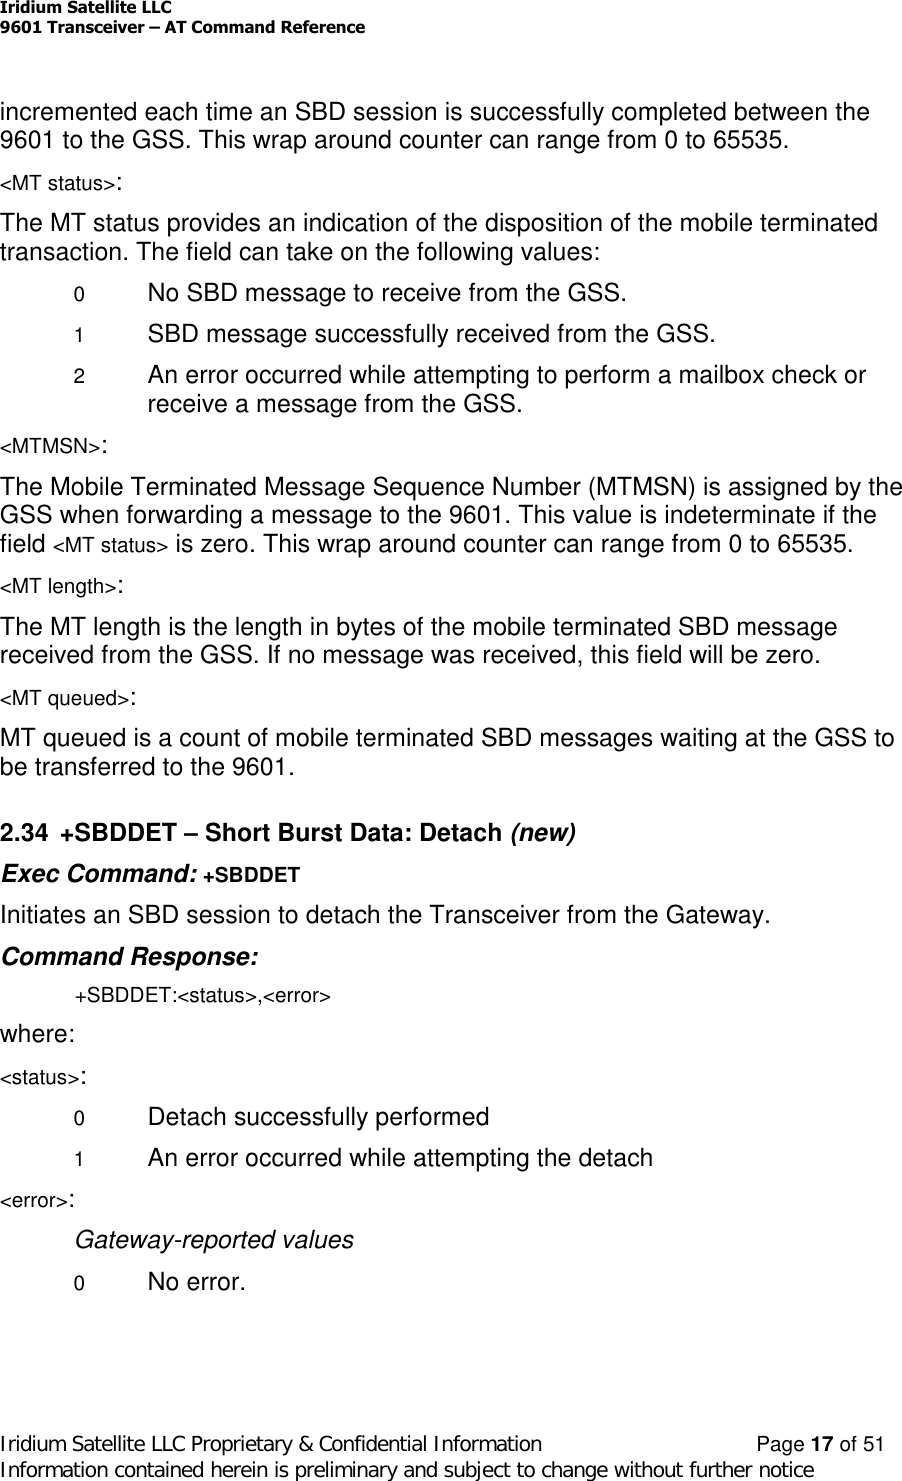 Iridium Satellite LLC9601 Transceiver –AT Command ReferenceIridium Satellite LLC Proprietary &amp; Confidential Information Page 17 of 51Information contained herein is preliminary and subject to change without further noticeincremented each time an SBD session is successfully completed between the9601 to the GSS. This wrap around counter can range from 0 to 65535.&lt;MT status&gt;:The MT status provides an indication of the disposition of the mobile terminatedtransaction. The field can take on the following values:0No SBD message to receive from the GSS.1SBD message successfully received from the GSS.2An error occurred while attempting to perform a mailbox check orreceive a message from the GSS.&lt;MTMSN&gt;:The Mobile Terminated Message Sequence Number (MTMSN) is assigned by theGSS when forwarding a message to the 9601. This value is indeterminate if thefield &lt;MT status&gt; is zero. This wrap around counter can range from 0 to 65535.&lt;MT length&gt;:The MT length is the length in bytes of the mobile terminated SBD messagereceived from the GSS. If no message was received, this field will be zero.&lt;MT queued&gt;:MT queued is a count of mobile terminated SBD messages waiting at the GSS tobe transferred to the 9601.2.34 +SBDDET –Short Burst Data: Detach (new)Exec Command: +SBDDETInitiates an SBD session to detach the Transceiver from the Gateway.Command Response:+SBDDET:&lt;status&gt;,&lt;error&gt;where:&lt;status&gt;:0Detach successfully performed1An error occurred while attempting the detach&lt;error&gt;:Gateway-reported values0No error.